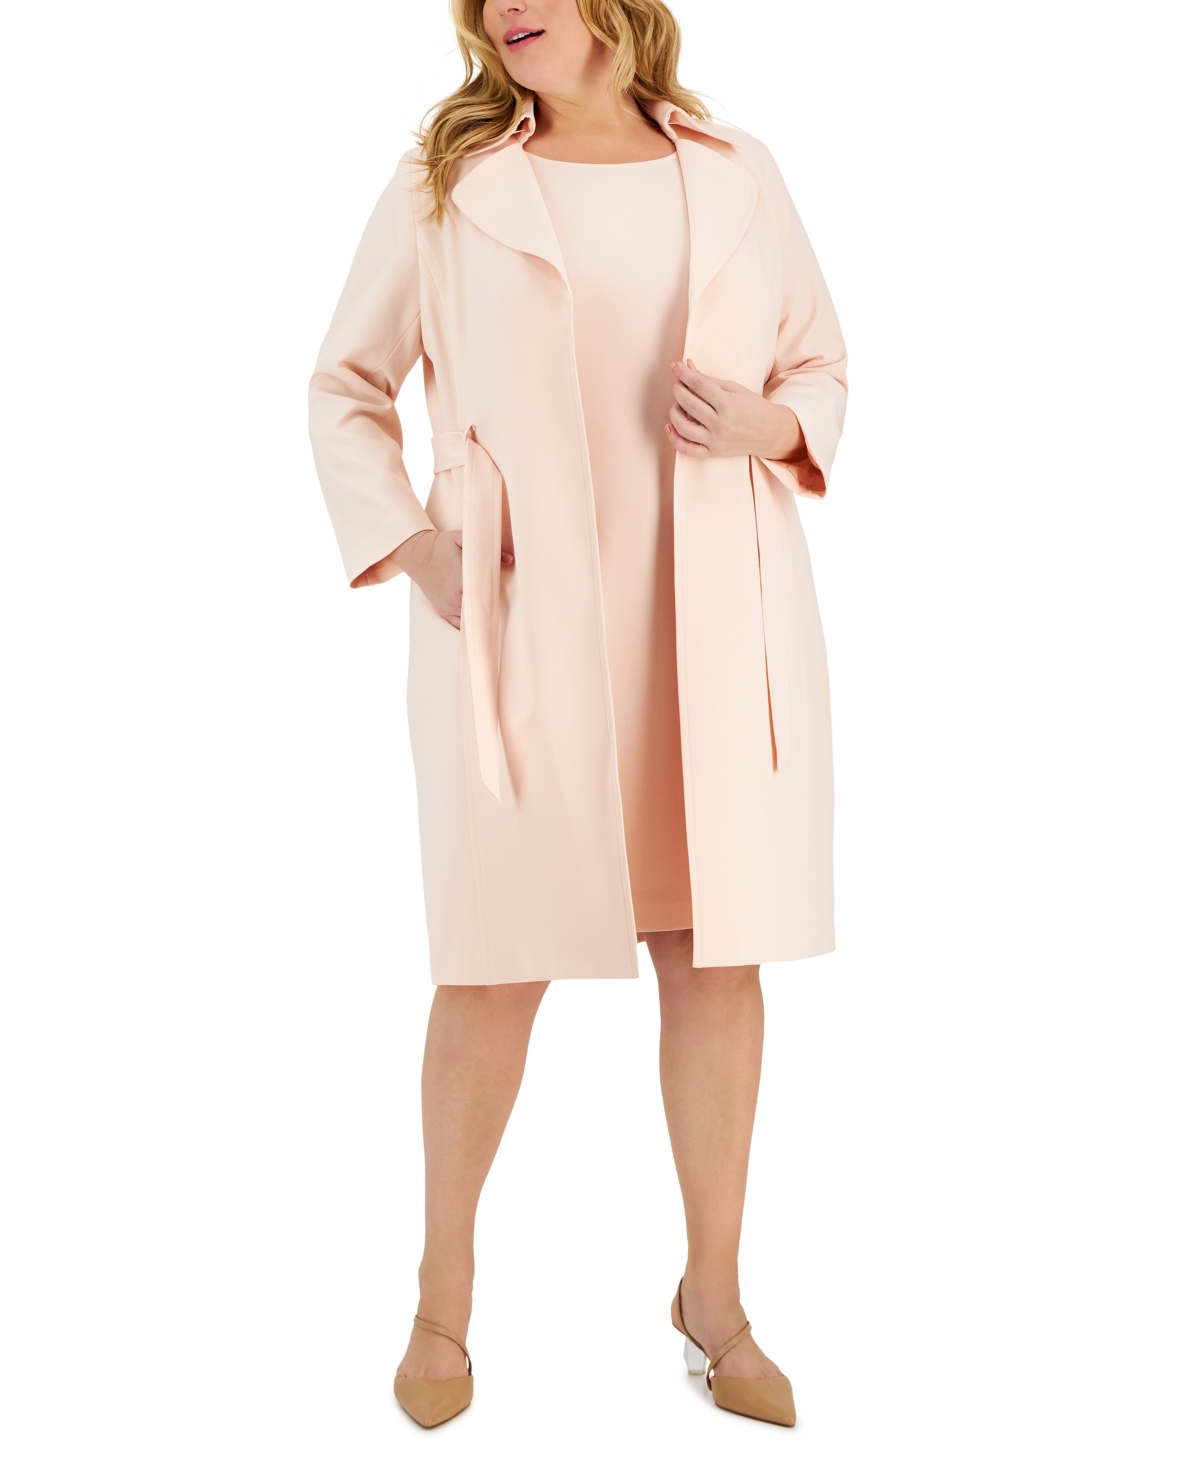 Le Suit Plus Size Belted Trench Jacket and Sheath Dress